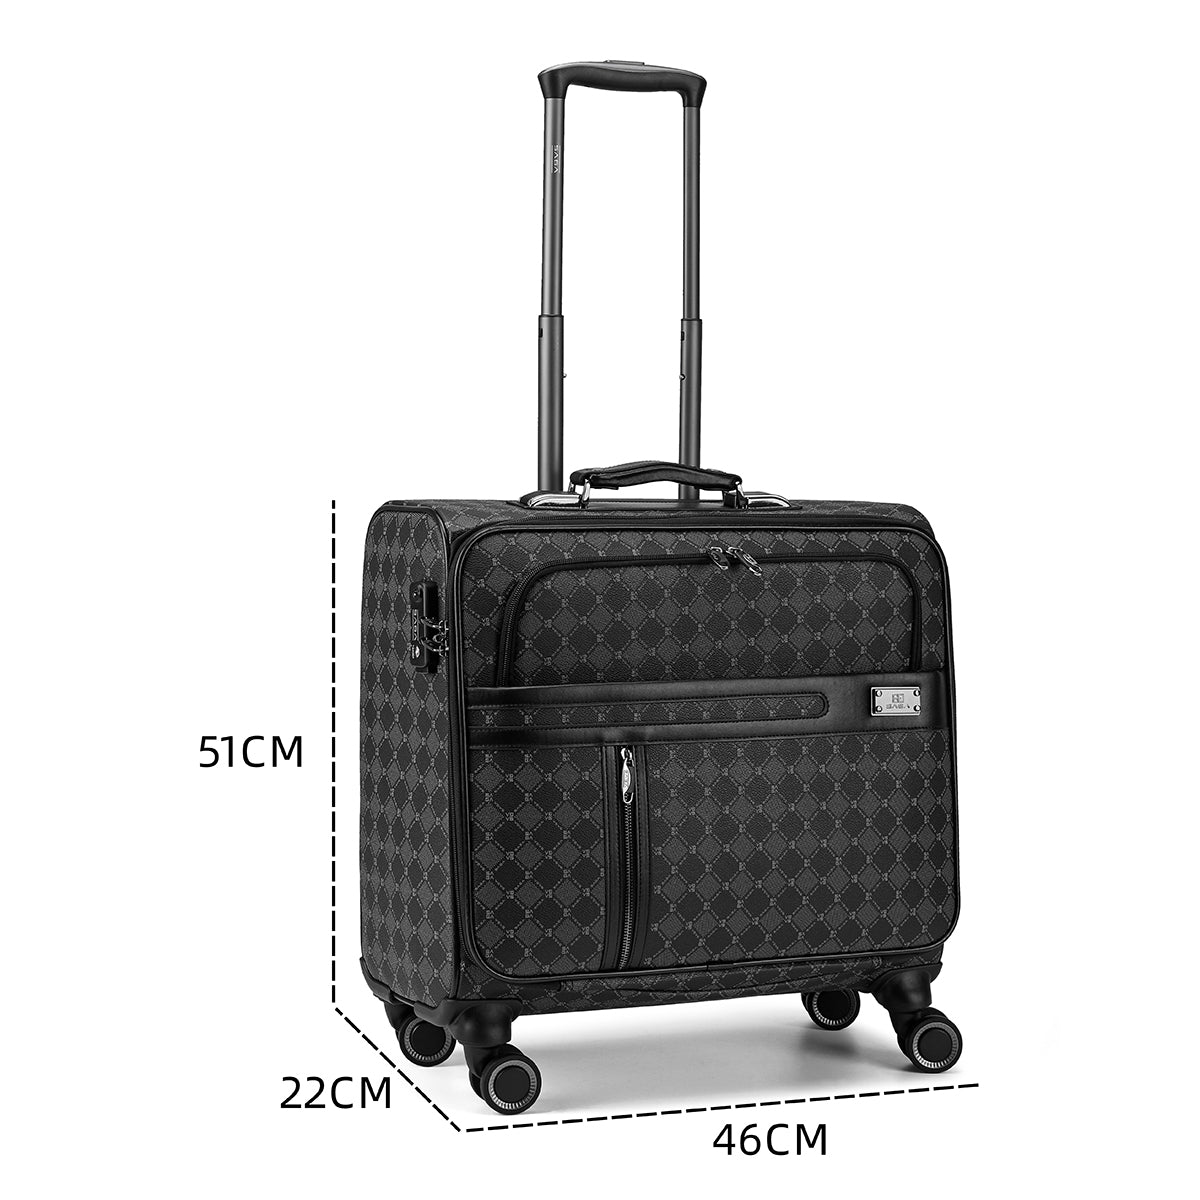 Luxury travel bags with high durability, available in several sizes, gray colour